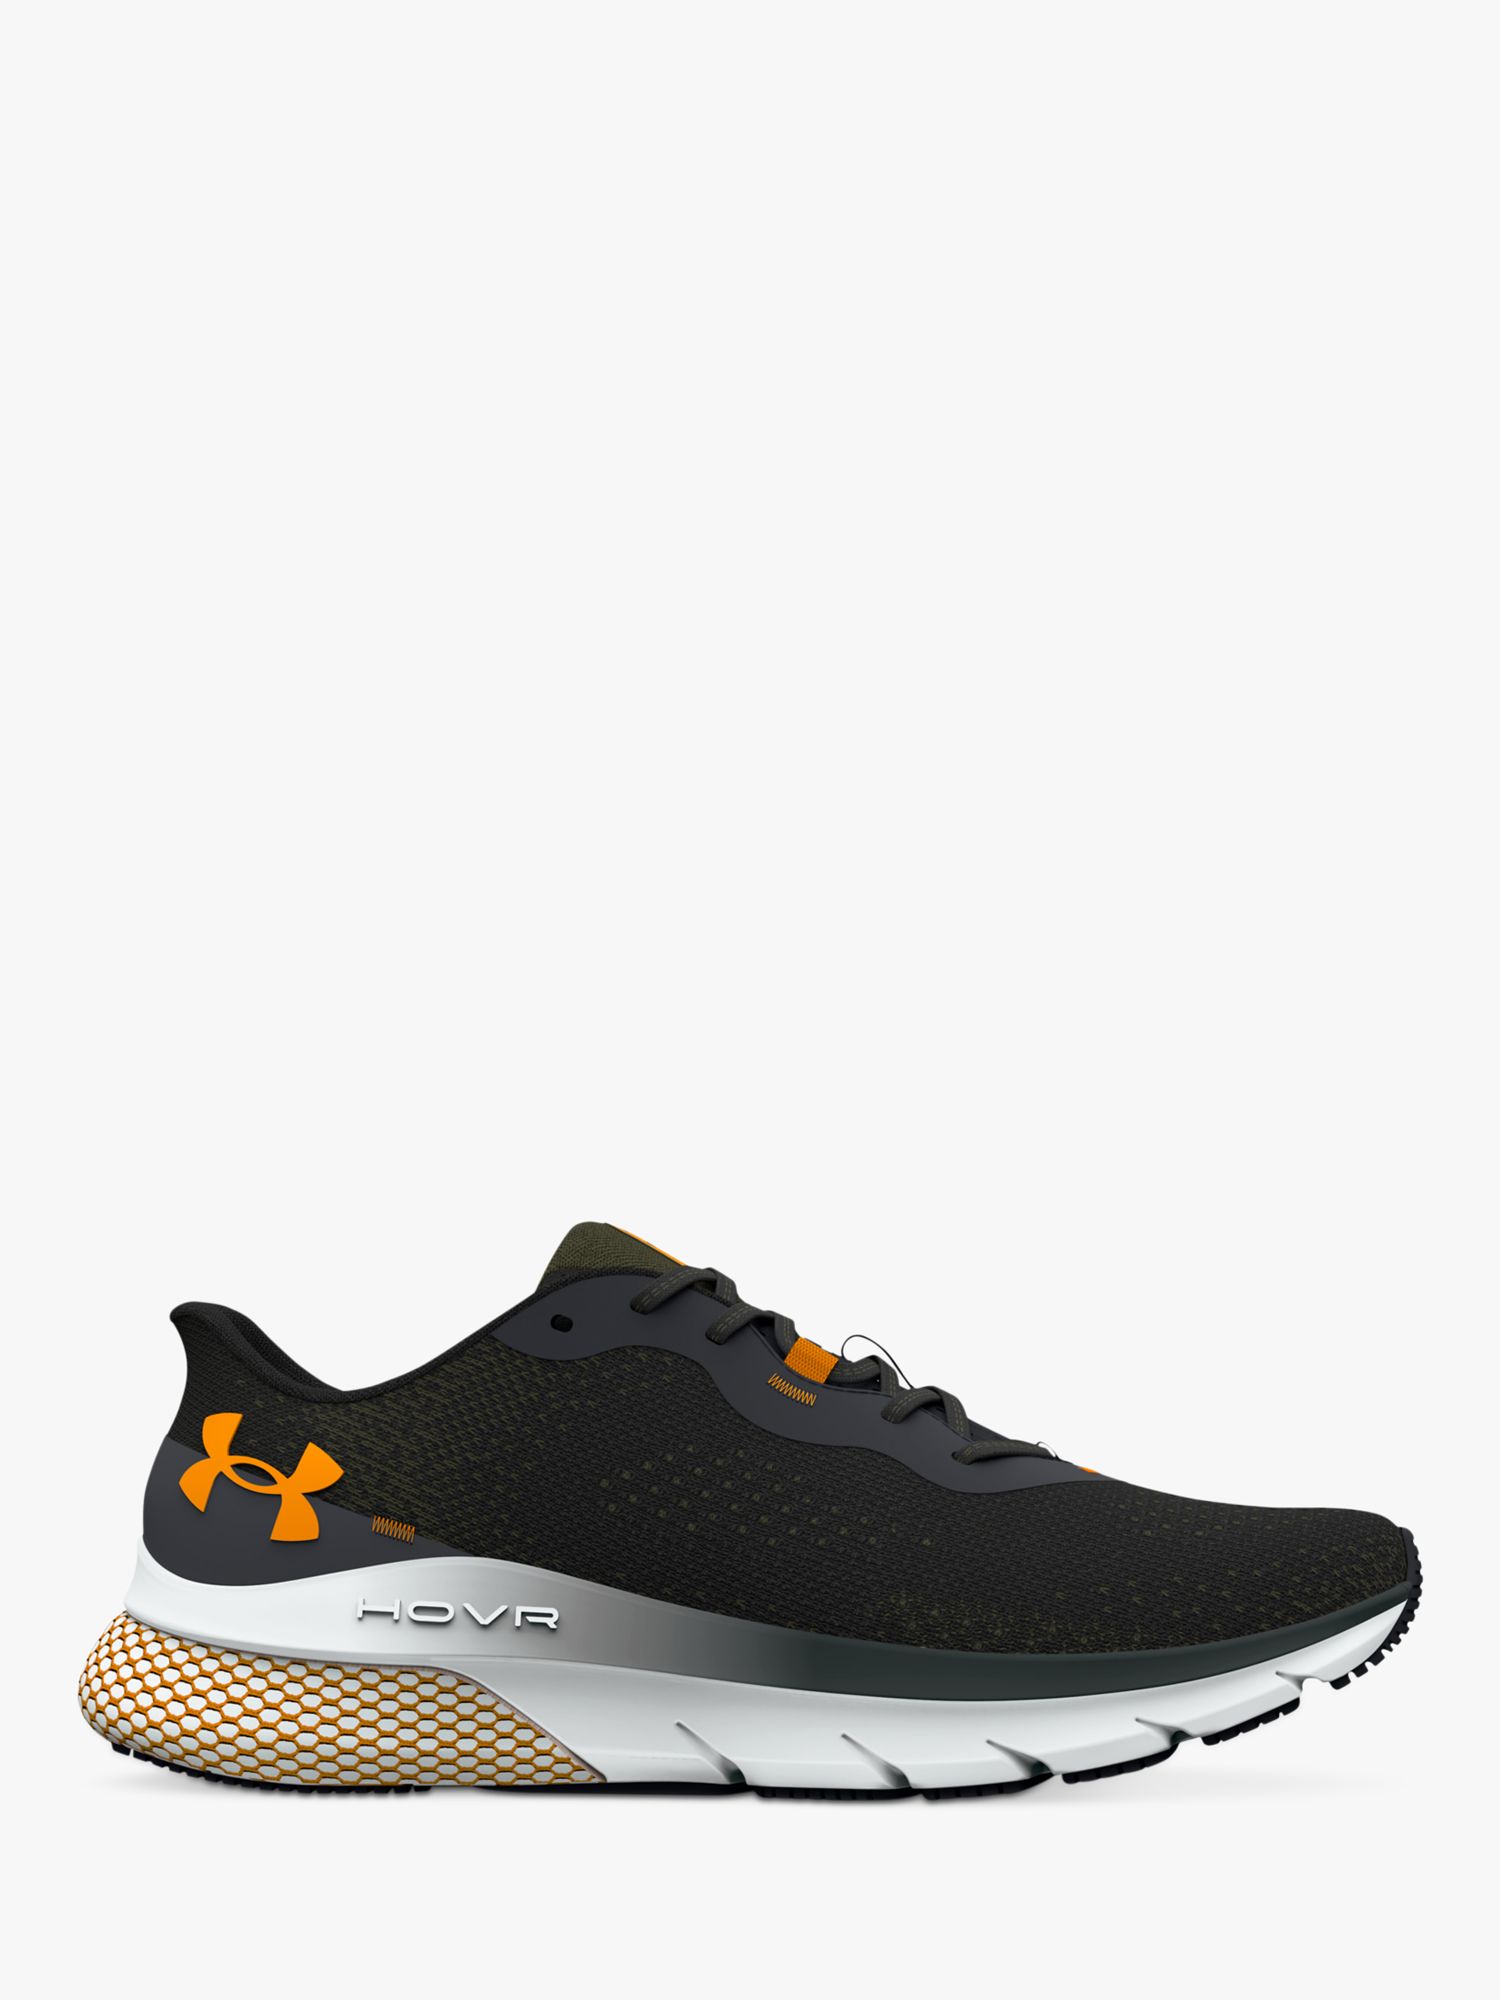 Under Armour Hovr Turbulence Print, Mens Running Shoes